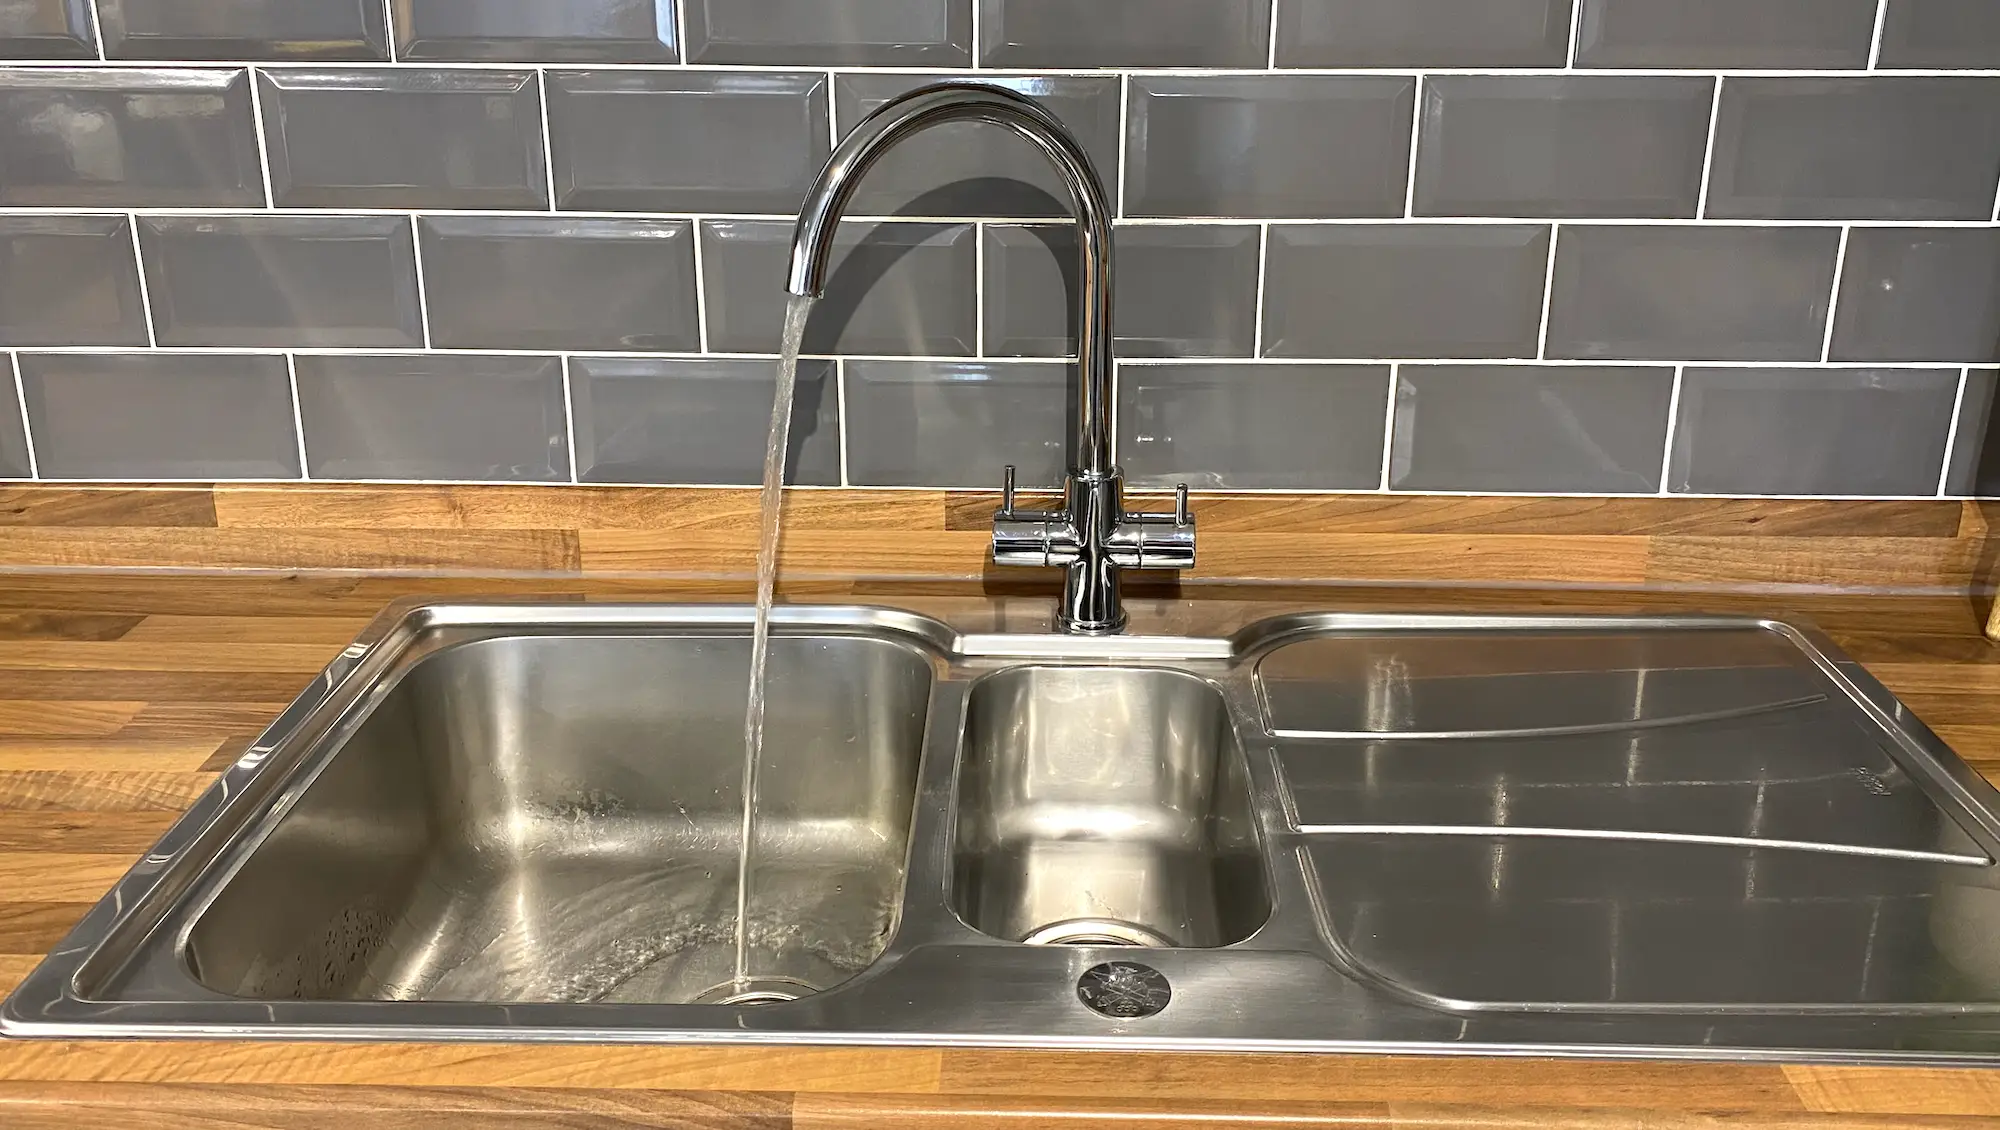 Estimates for replace a kitchen mixer tap near Bloomsbury